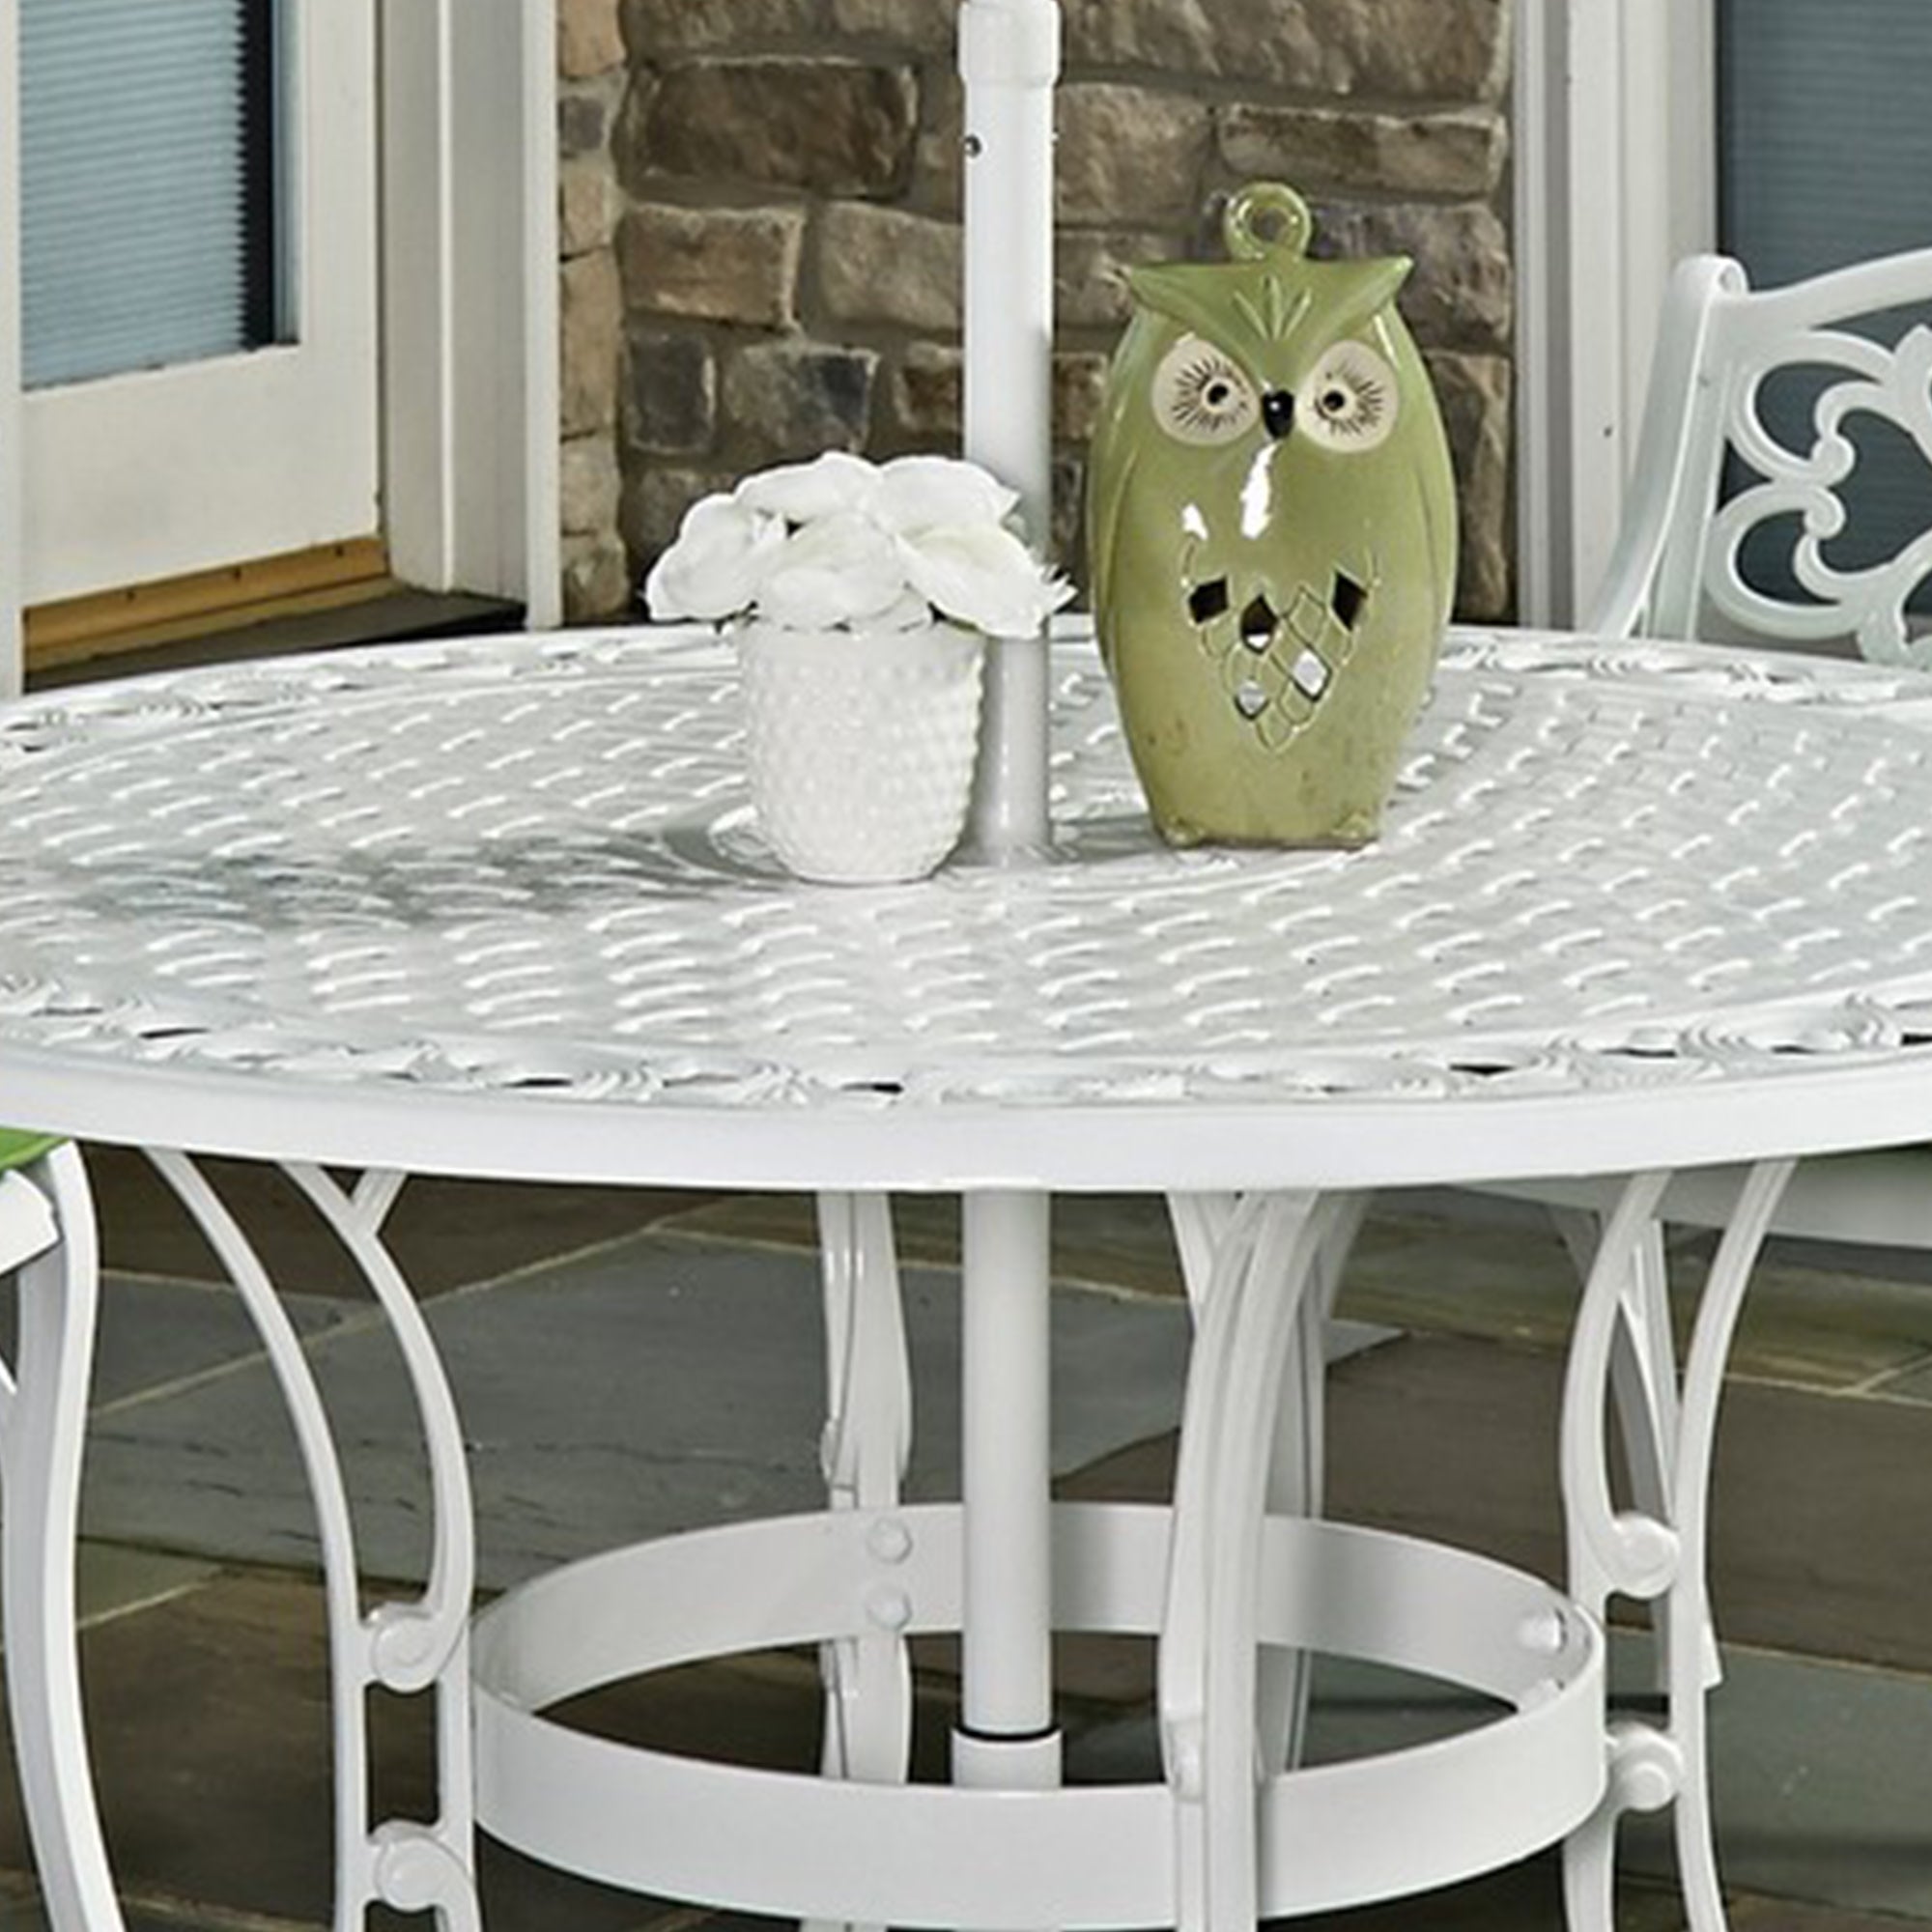 Sanibel Outdoor Dining Table by Homestyles - White - Aluminum - 6652-32